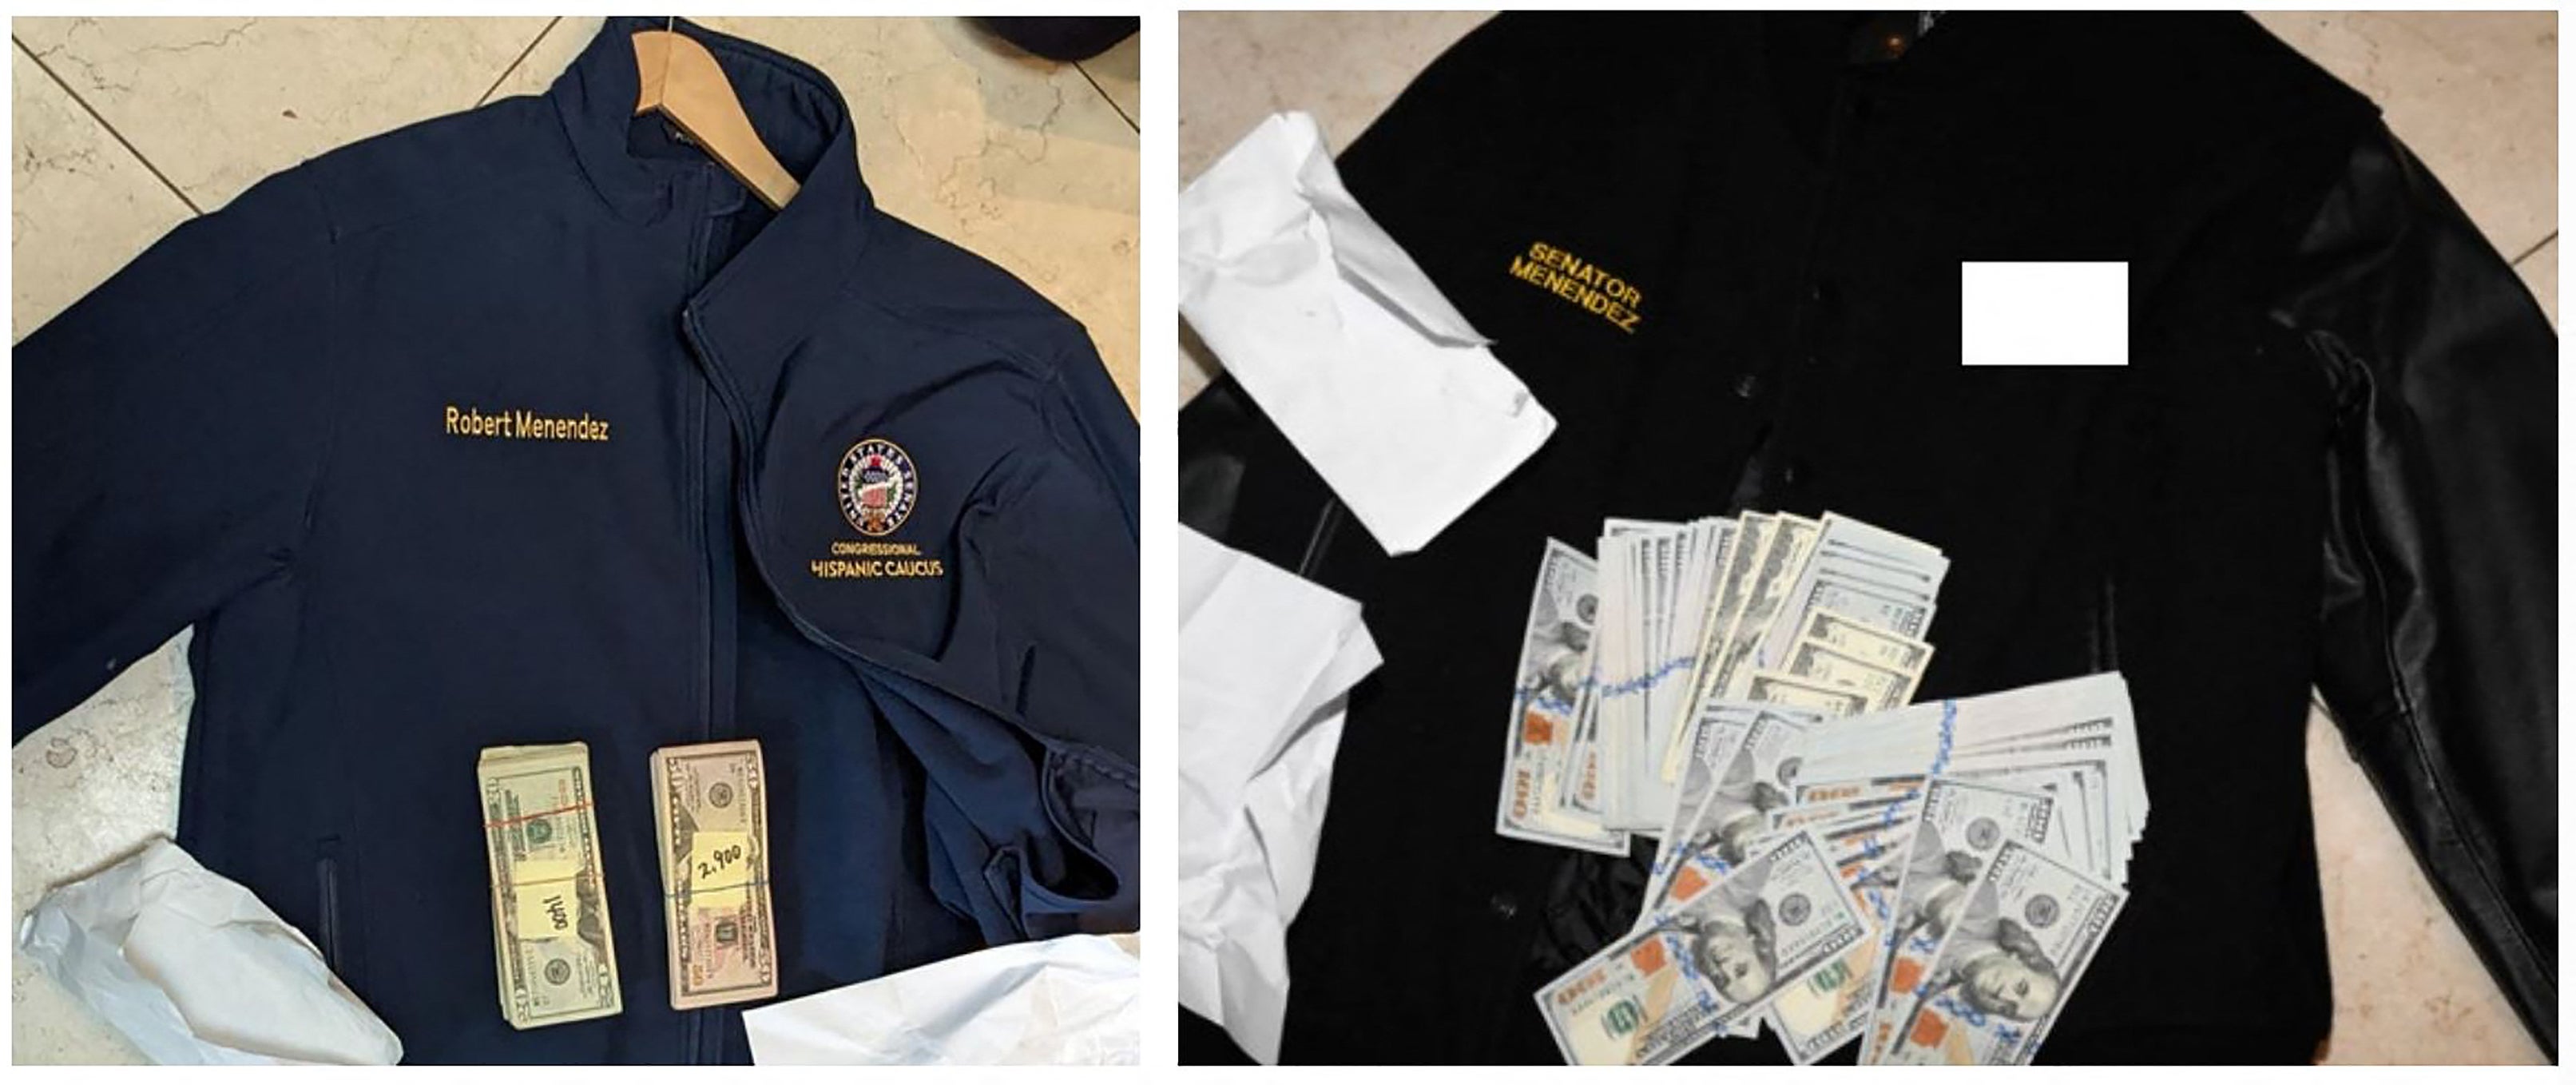 This undated image included in an indictment against Senator Robert Menendez shows money found in jackets belonging to the powerful head of the Senate Foreign Relations Committee.